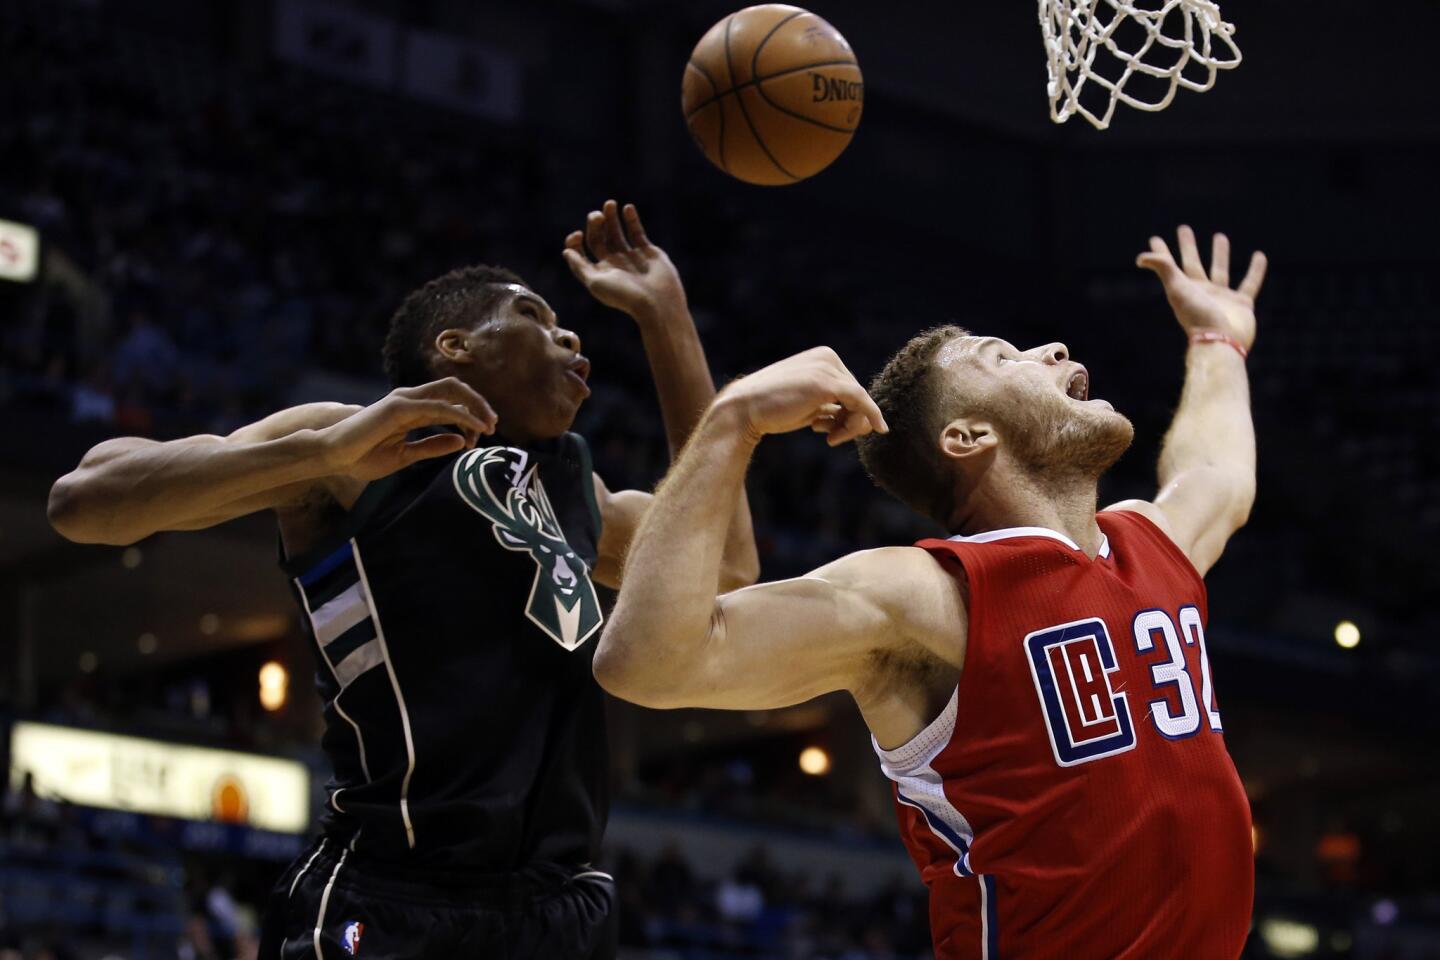 Los Angeles Clippers' Blake Griffin, left, and Milwaukee Bucks' Michael  Carter-Williams, right, run after a loose ball during the second half of an  NBA basketball game, Wednesday, Dec. 16, 2015, in Los